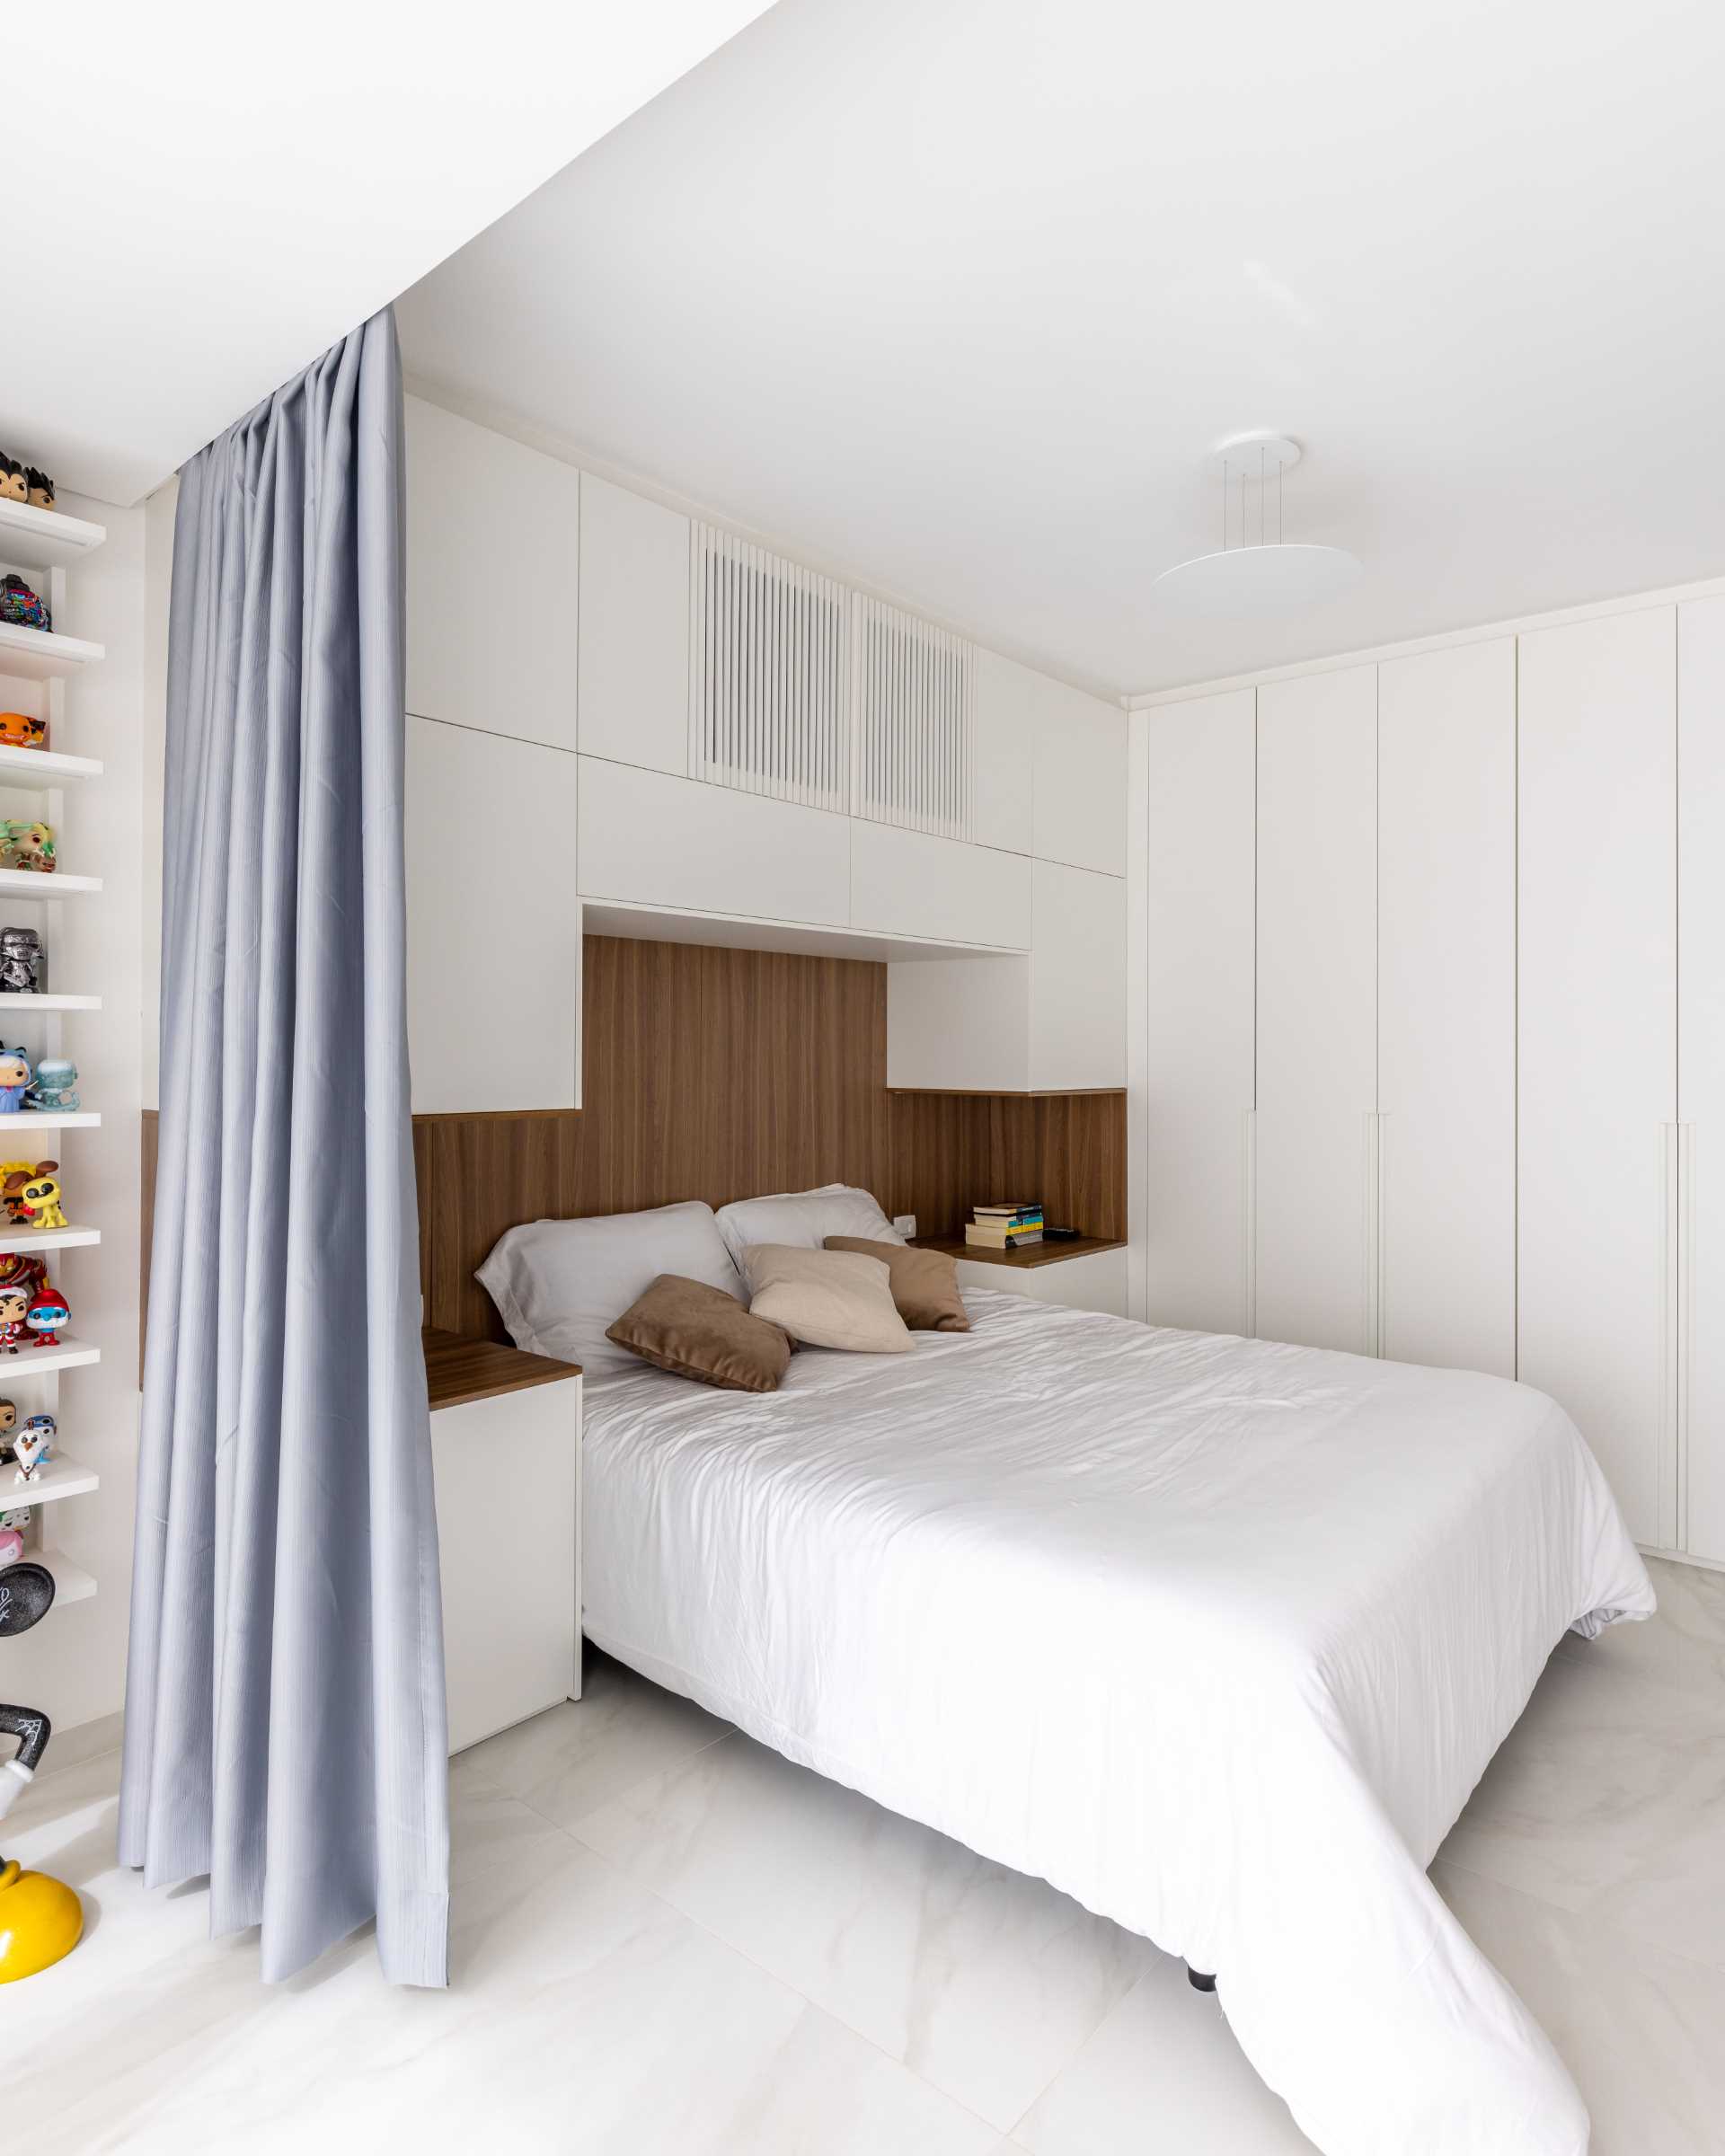 A modern open-plan bedroom with curtains for walls, storage, and wood headboard.